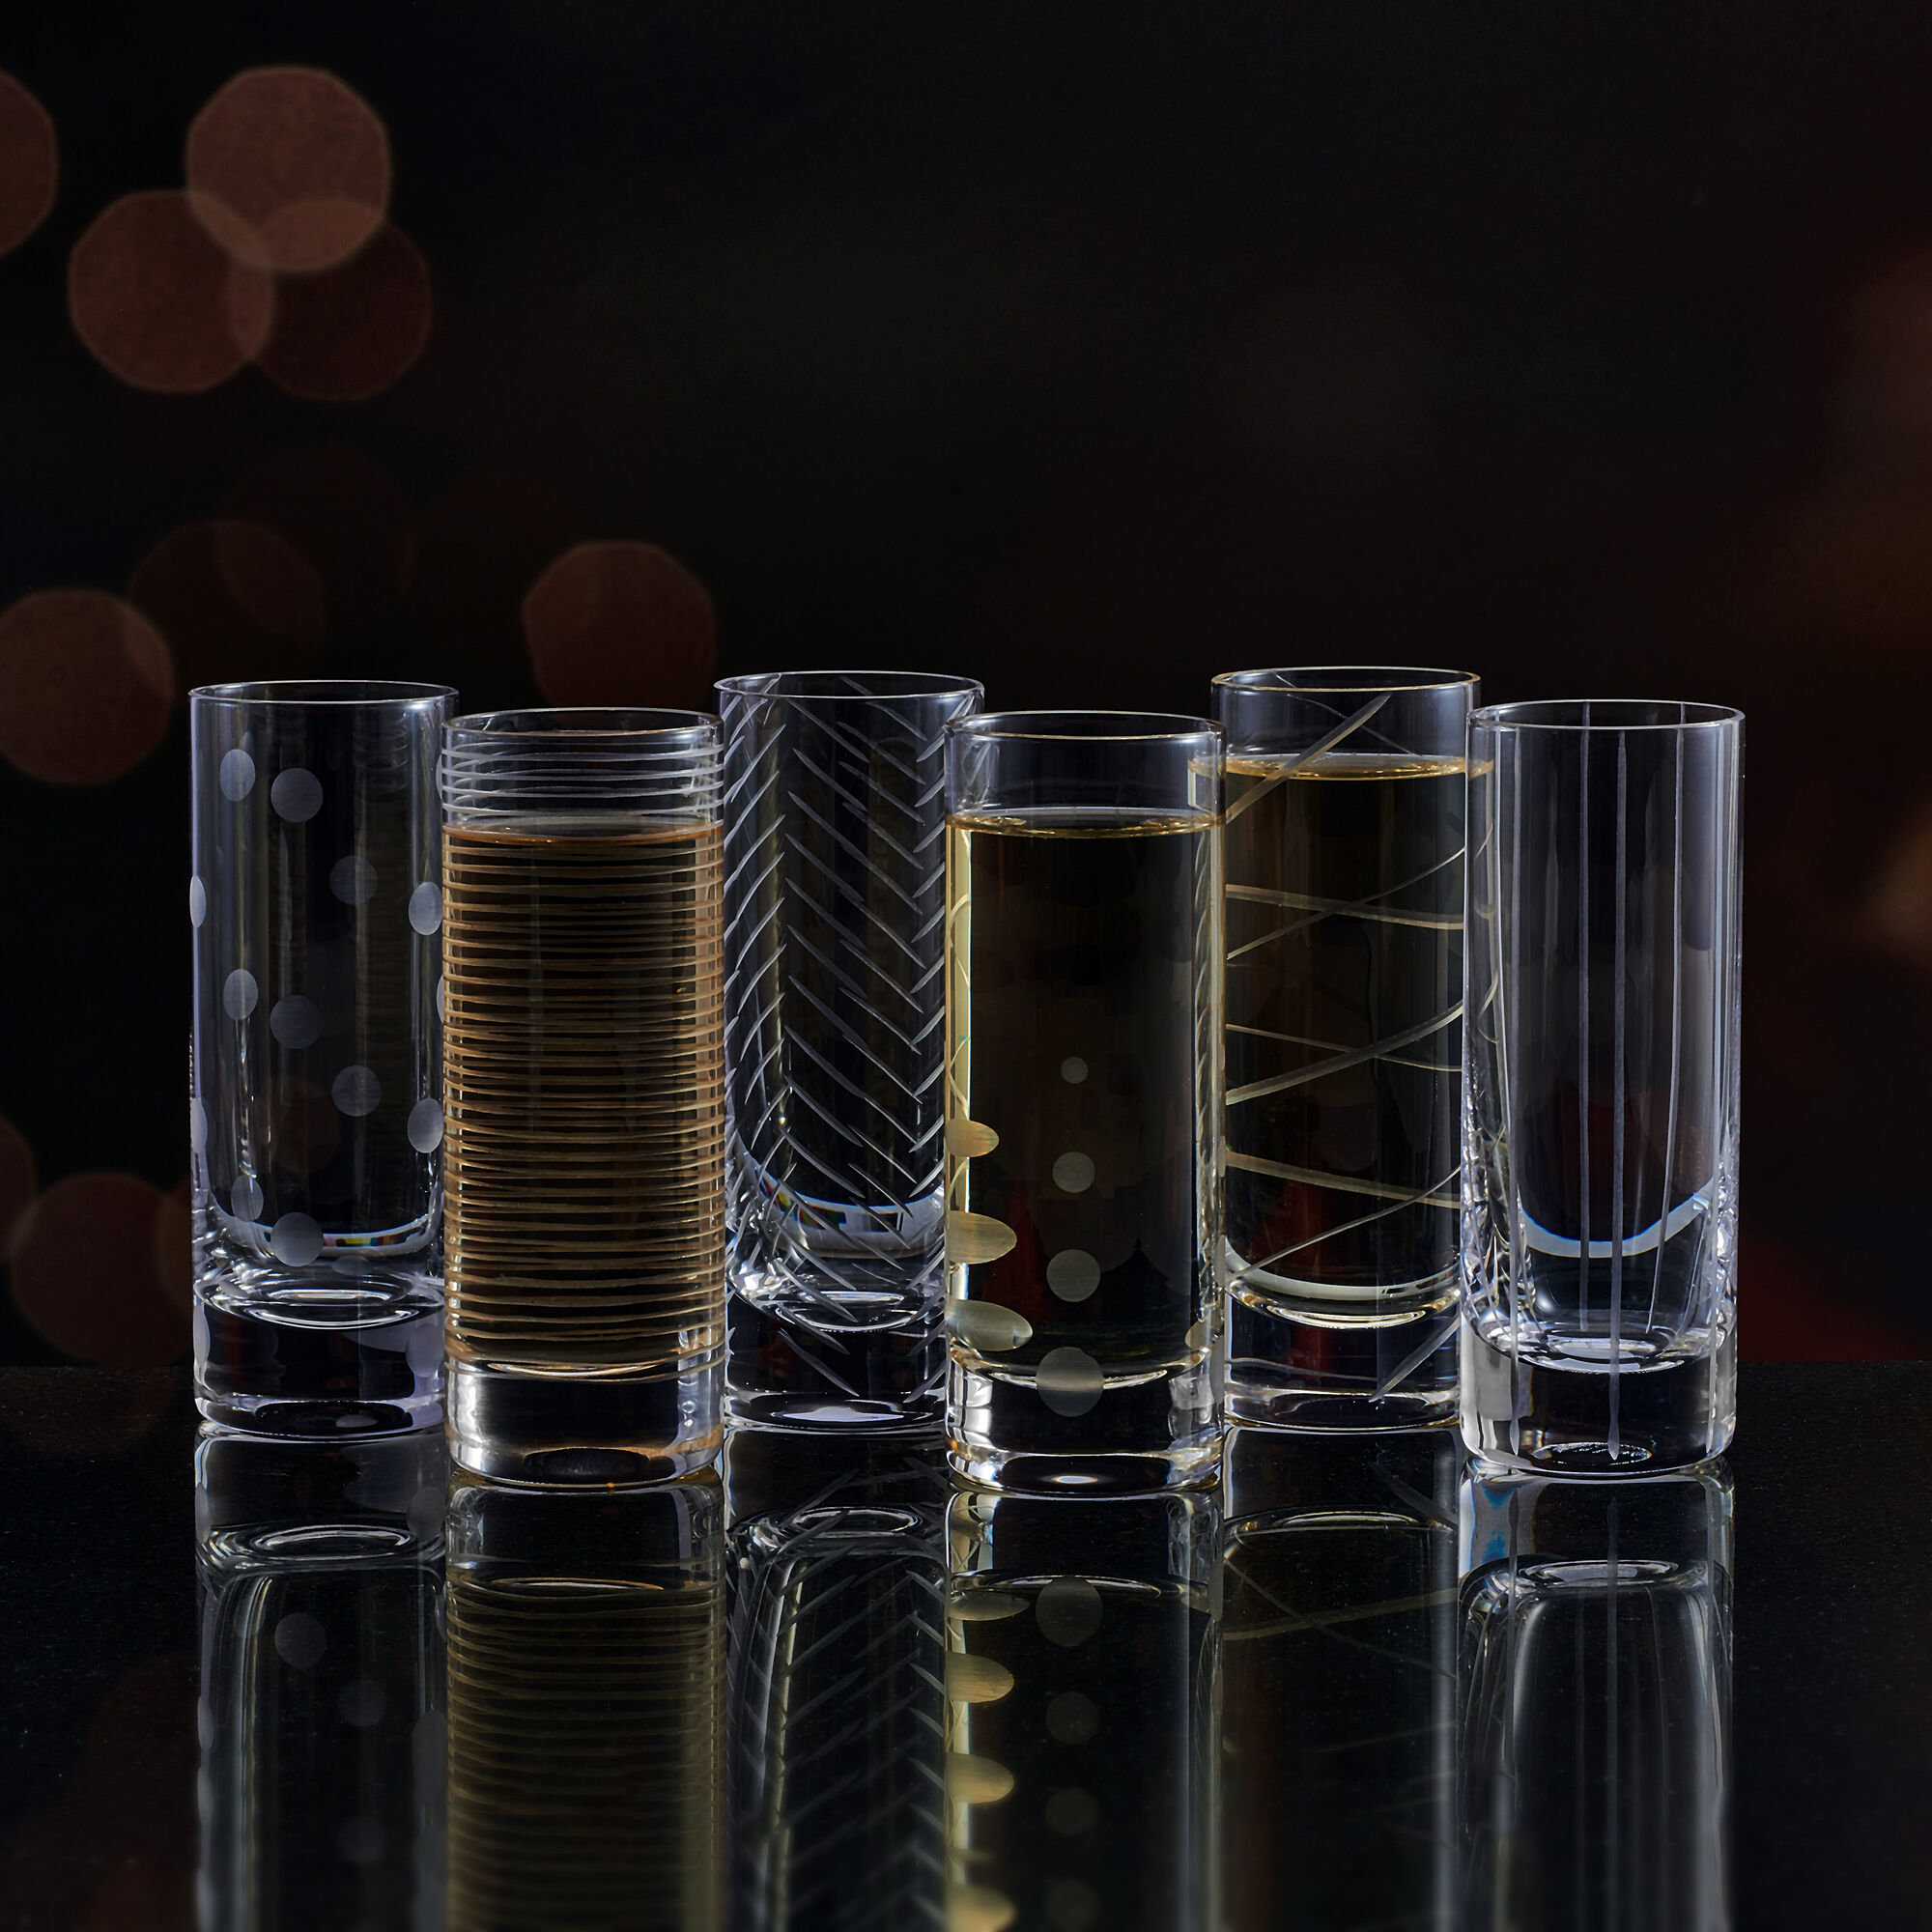 12 Pieces Espresso Shot Glass Measuring Cup Glass with Shot Line